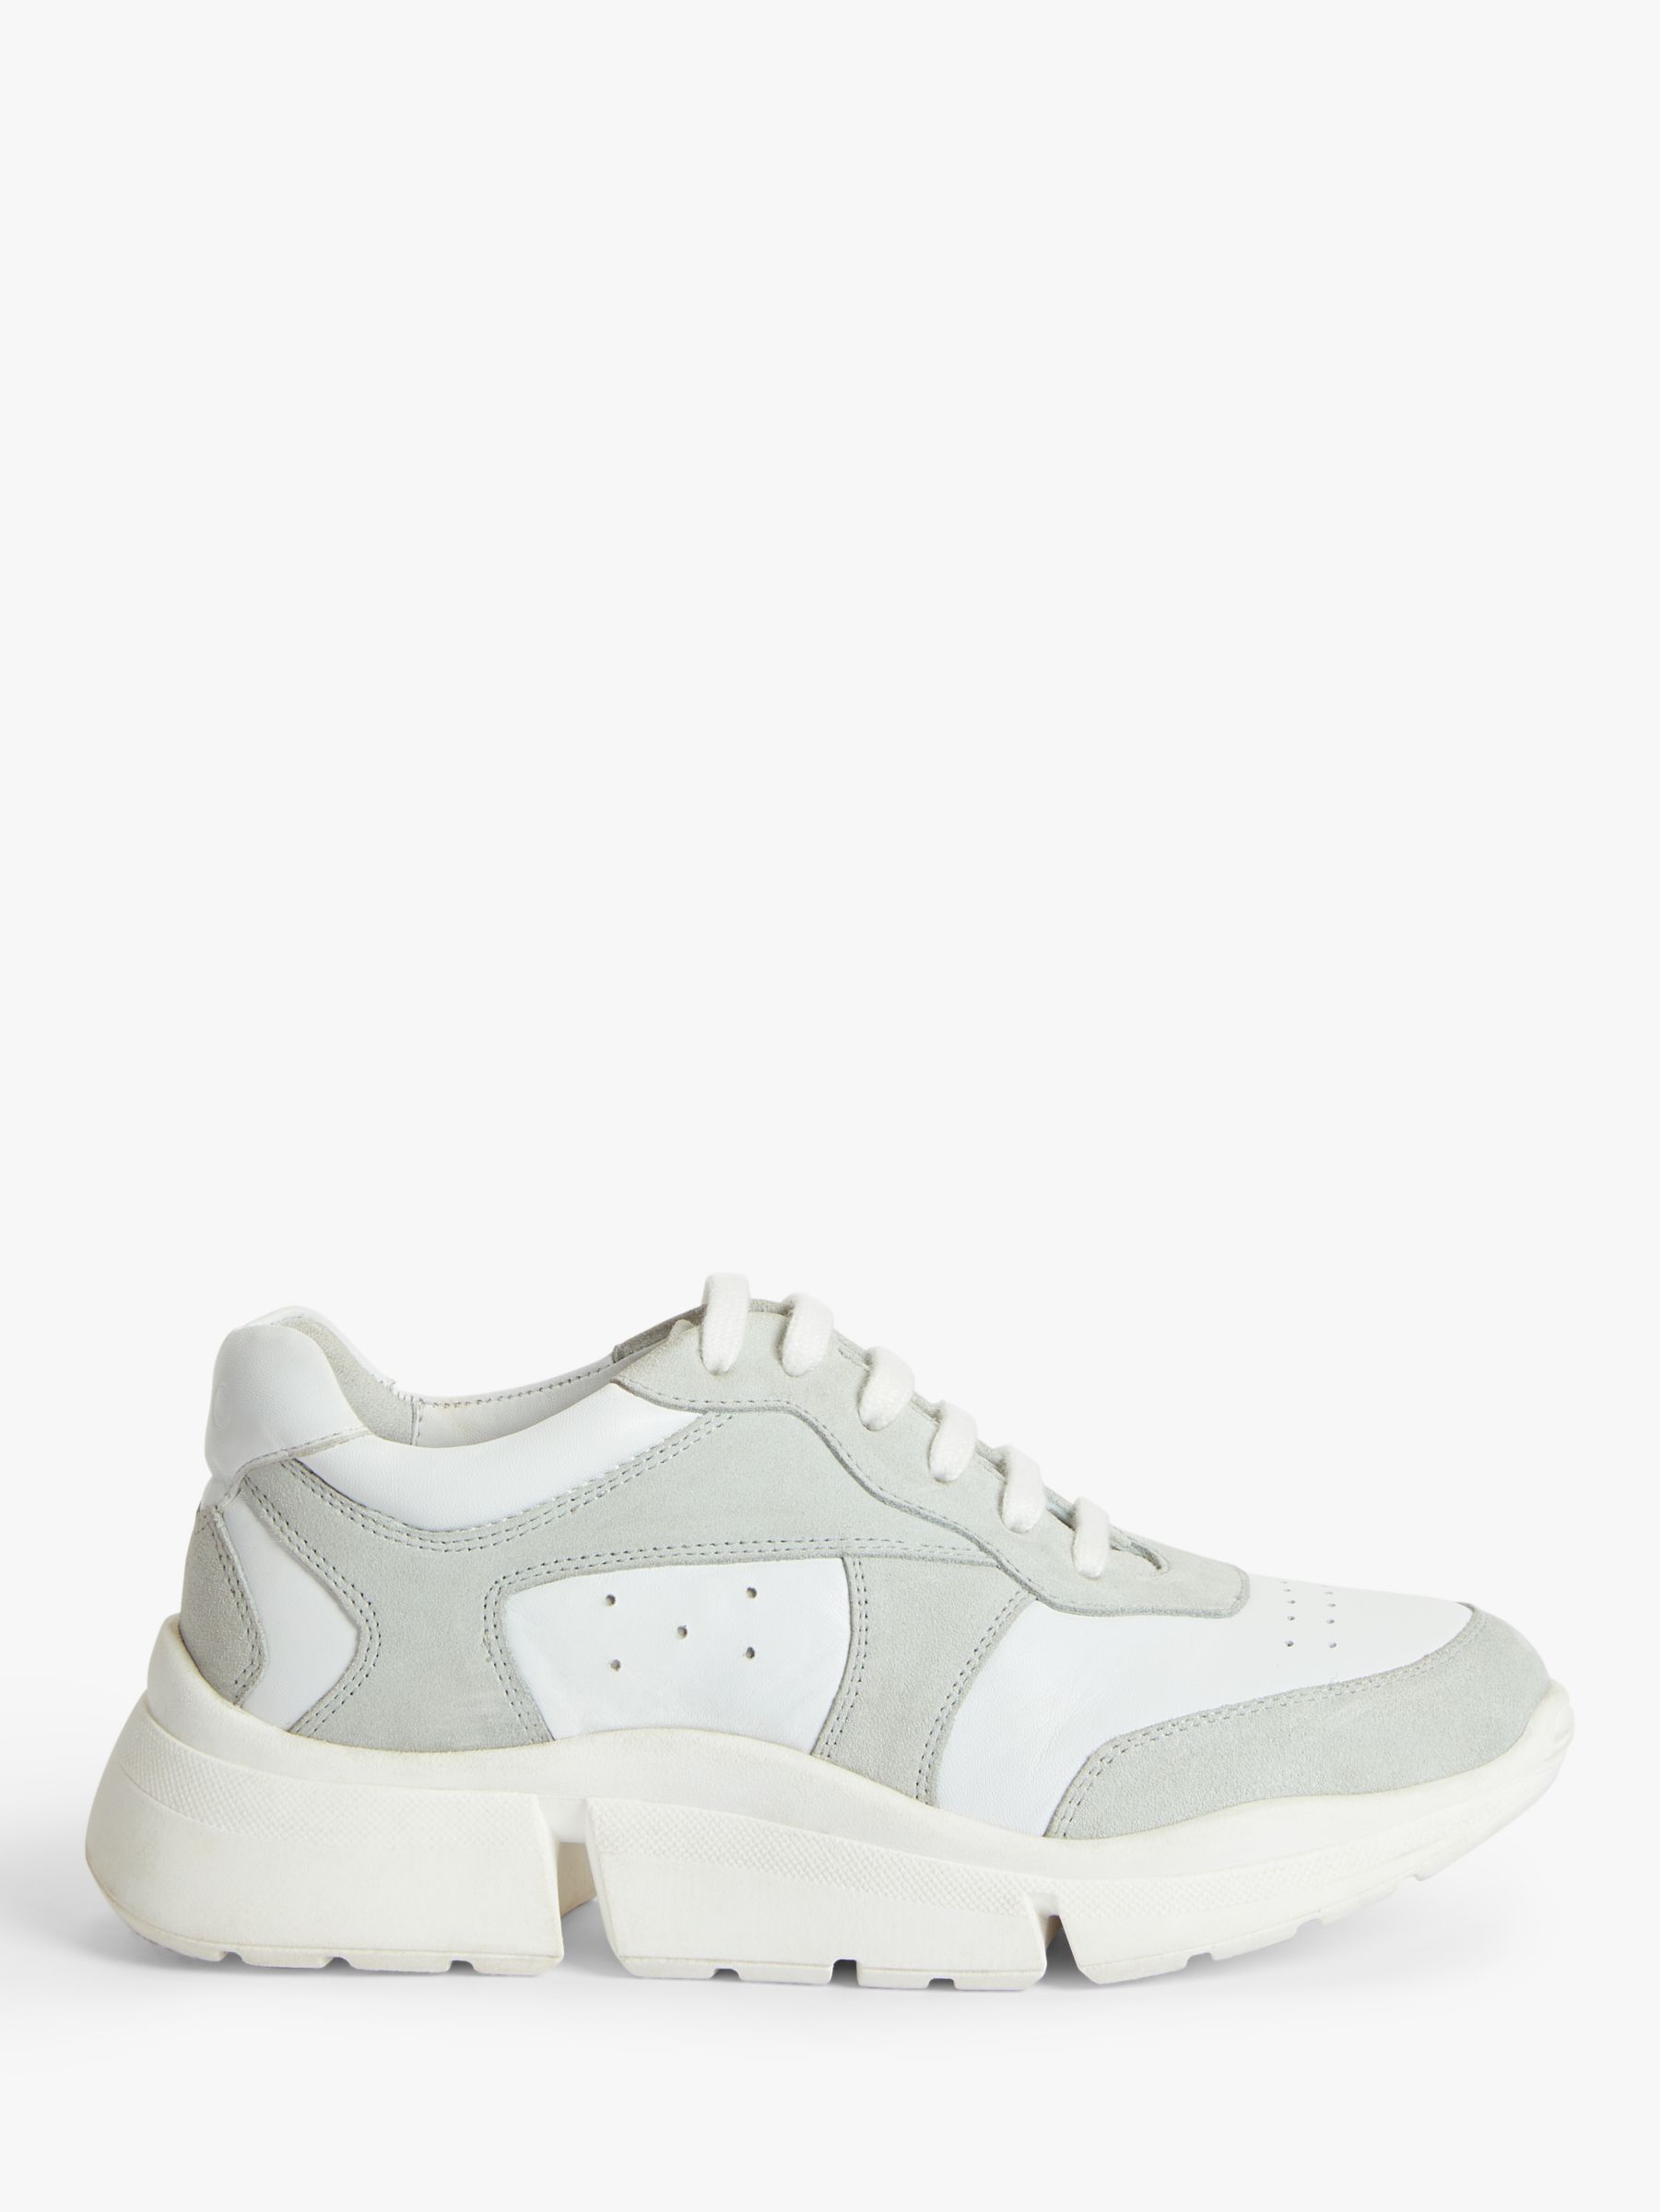 Kin Earnell Chunky Leather Trainers, White